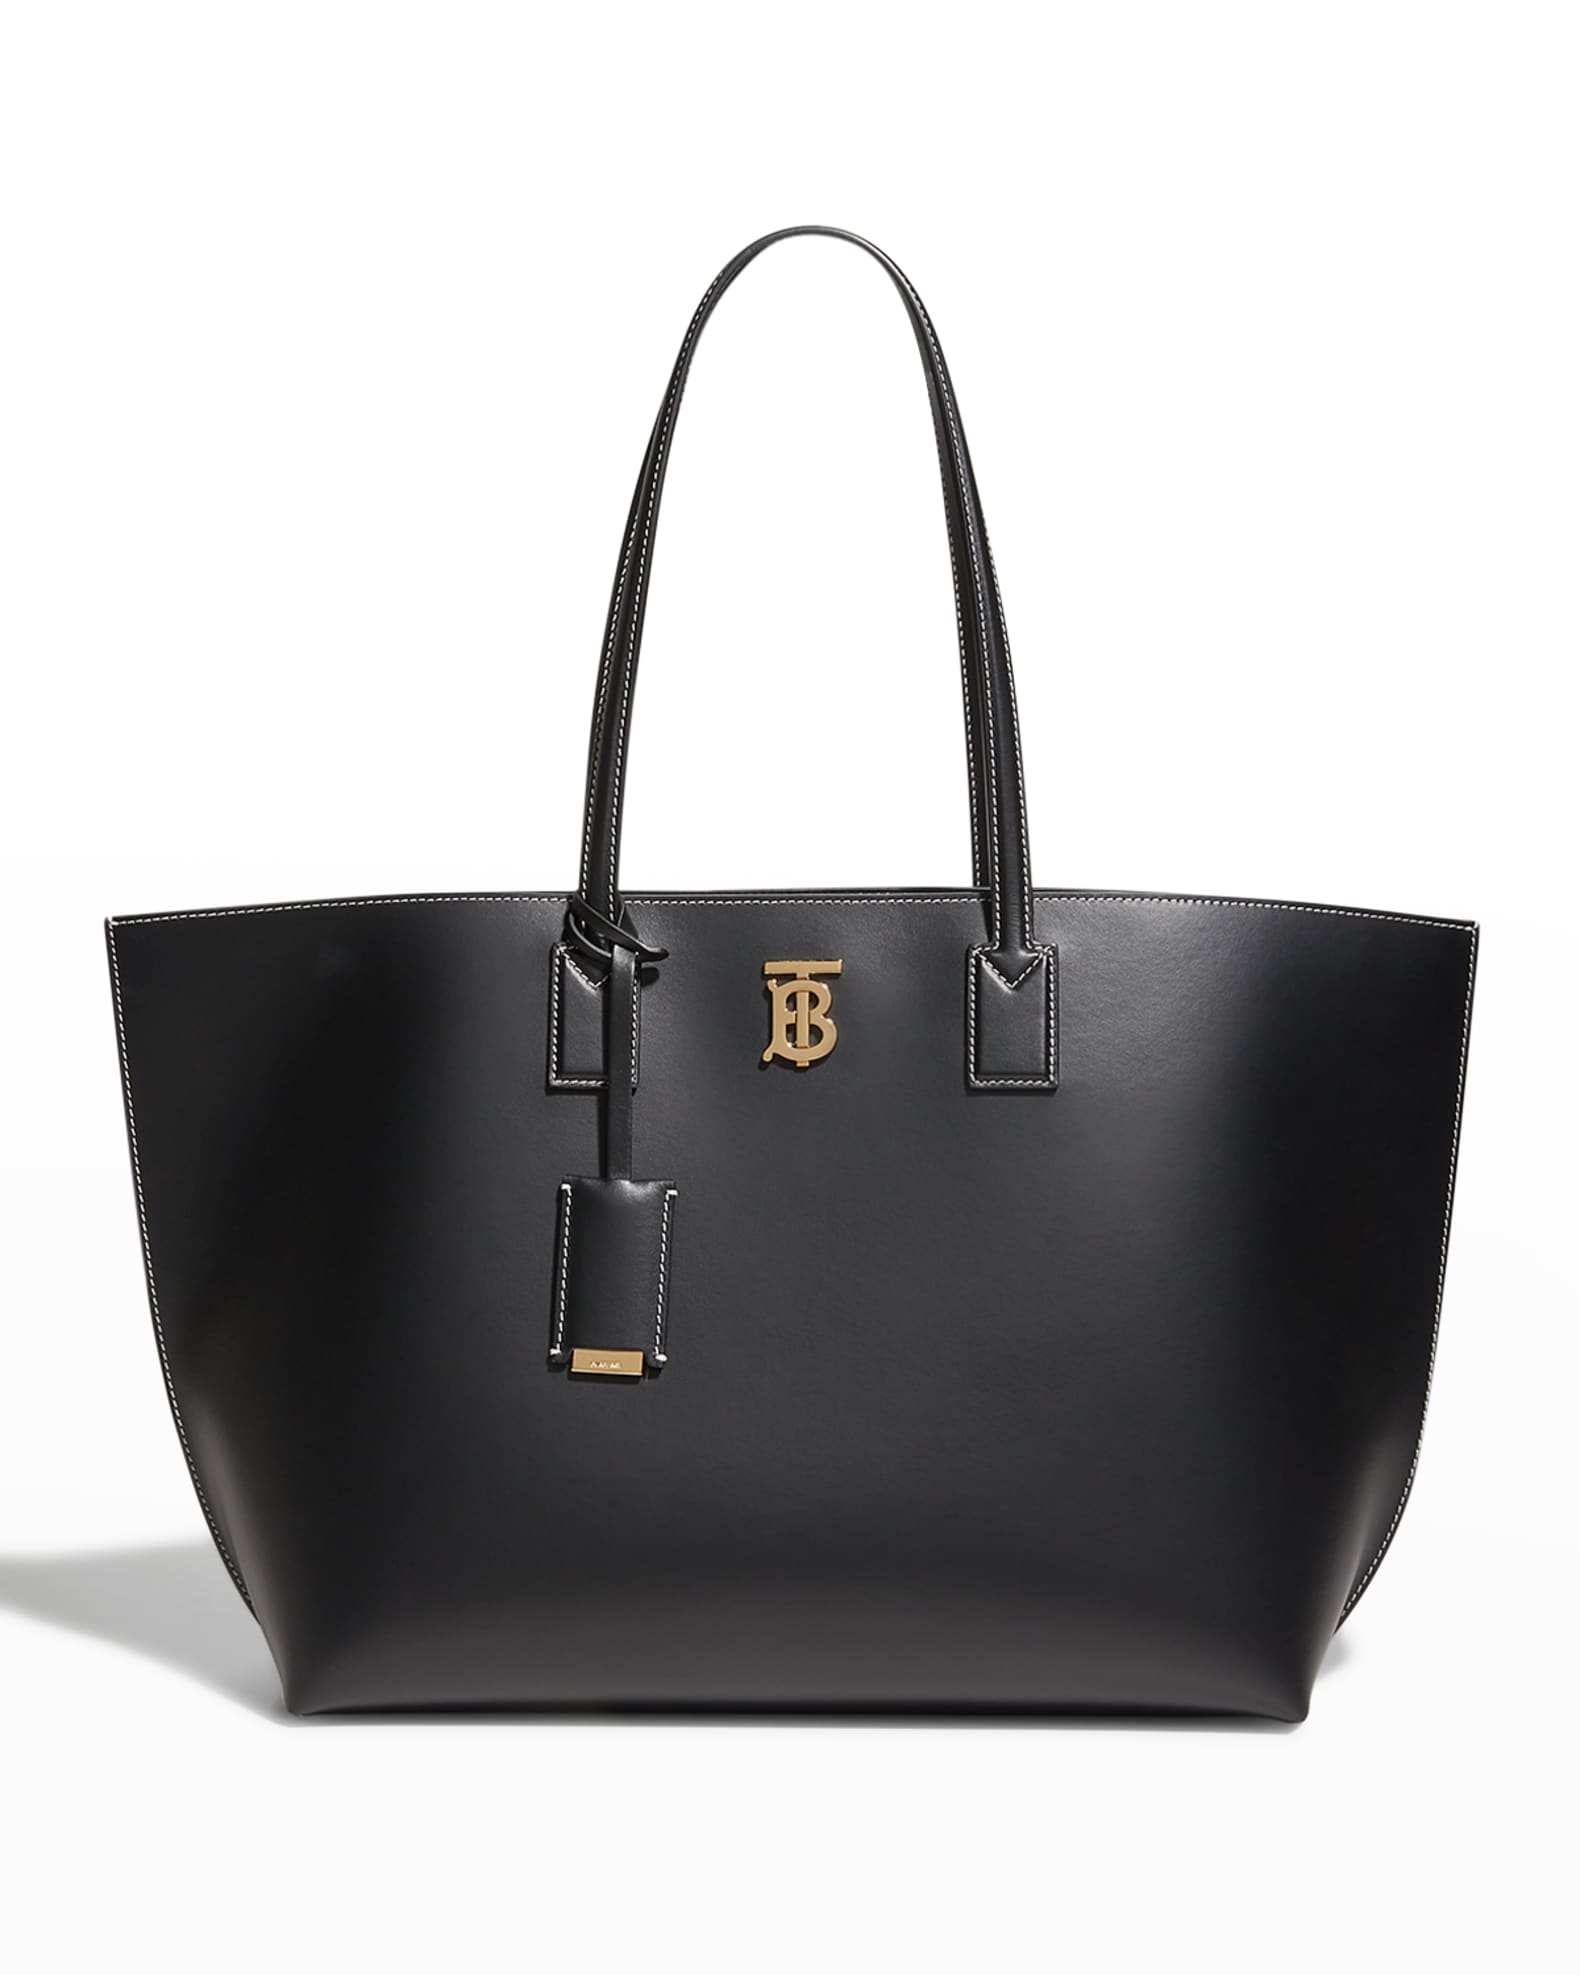 Burberry TB Smooth Leather Tote Bag | Neiman Marcus